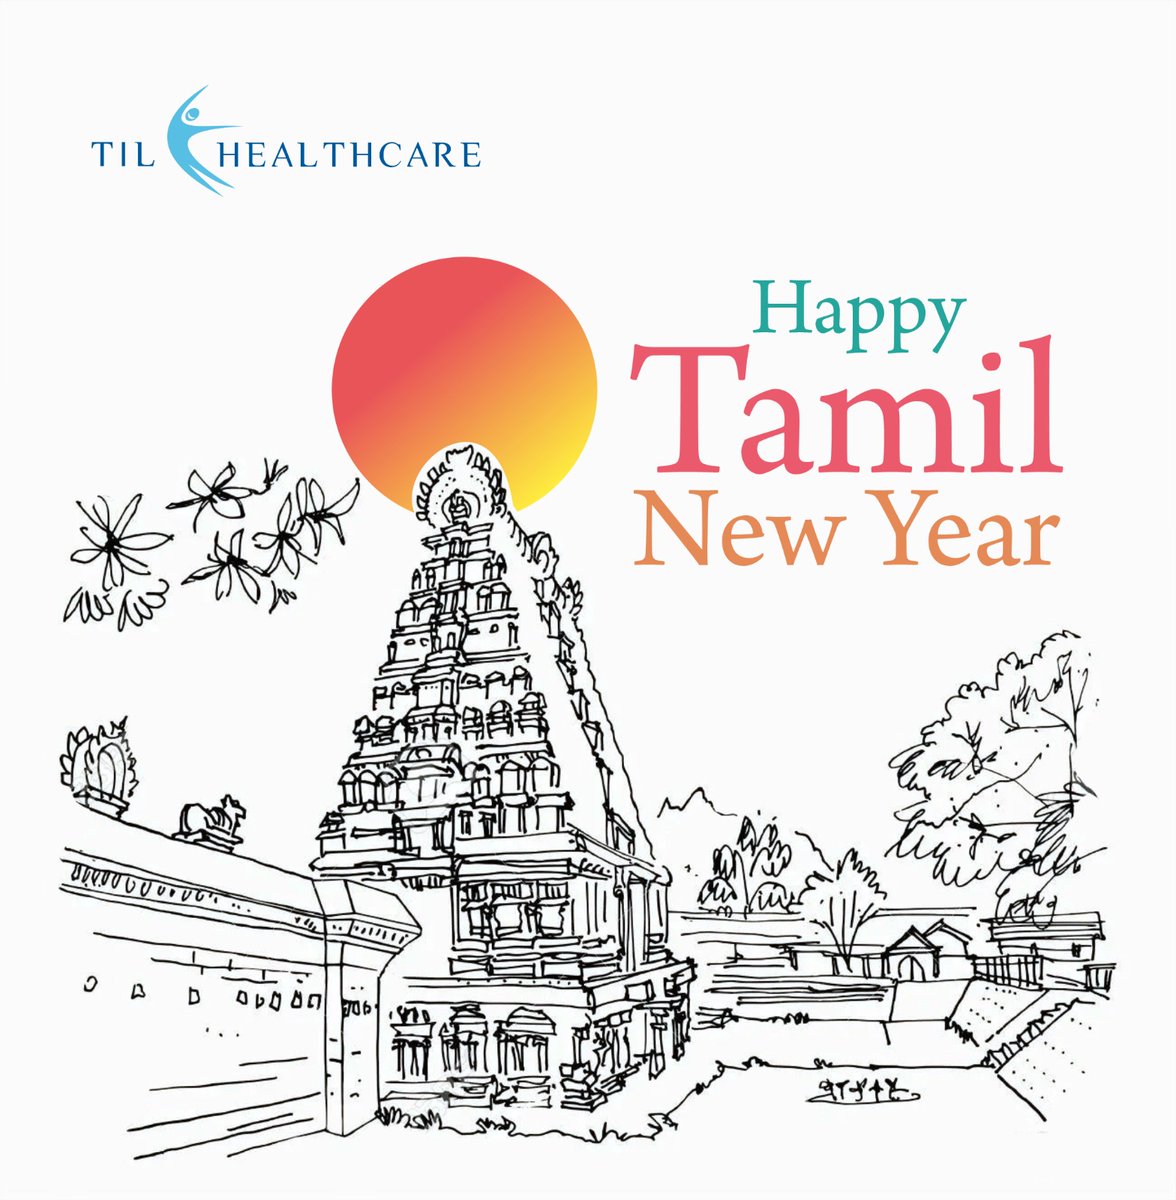 Happy Tamil New Year!  Let's celebrate the rich traditions and vibrant culture of Tamil Nadu as we welcome the auspicious occasion of #Puthandu.  #TamilNewYear #Puthandu #TILHealthcare #Pharmacutical #pharmamarketing #pharmaexport #tamilnadu #worldwide #2024